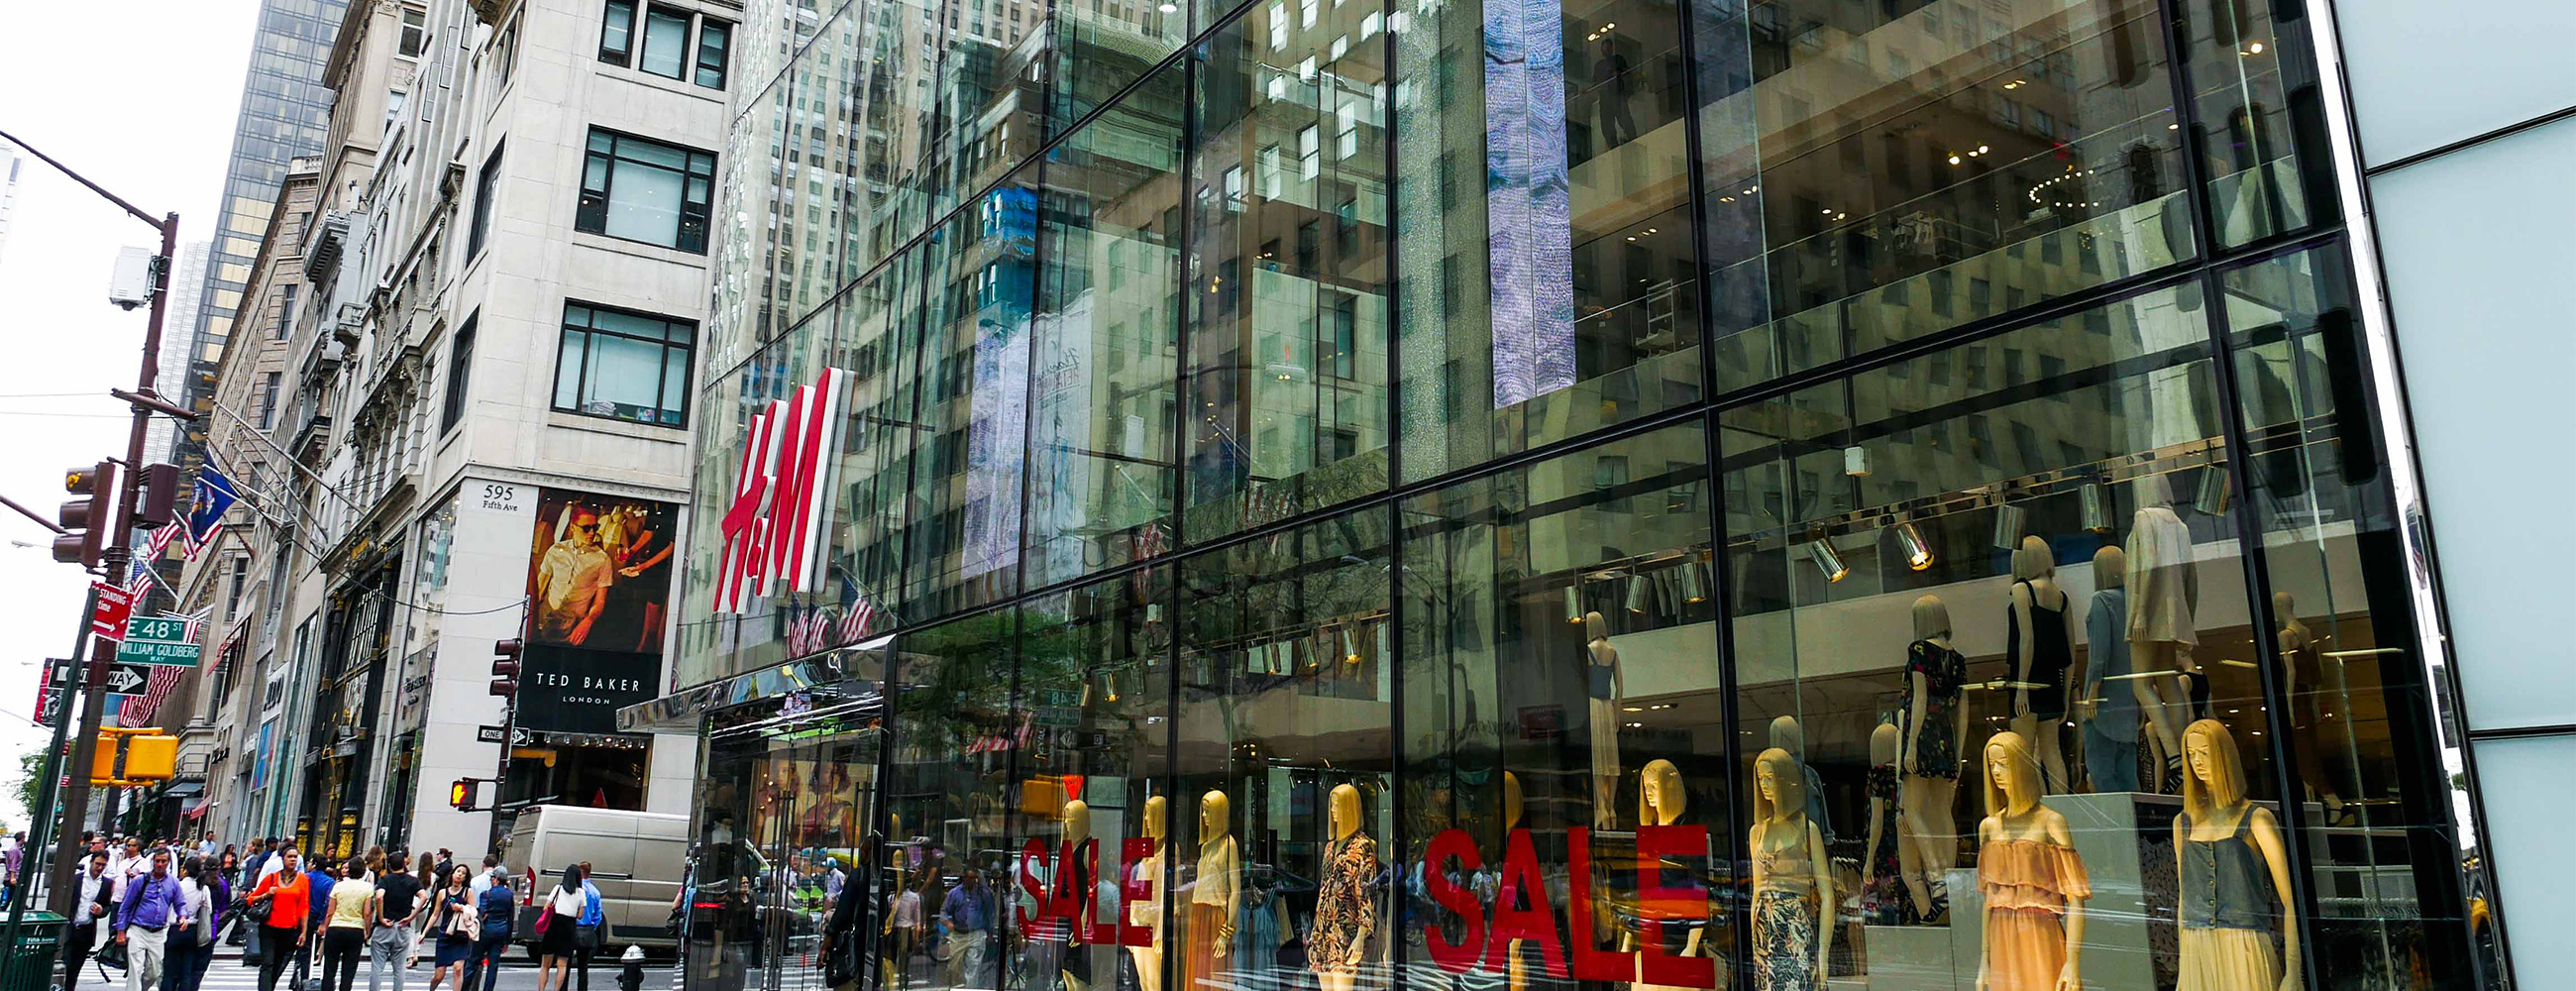 Sideview of view of H&M flagship store on 5th ave. Highlights the oversize laminated and insulated glass units.